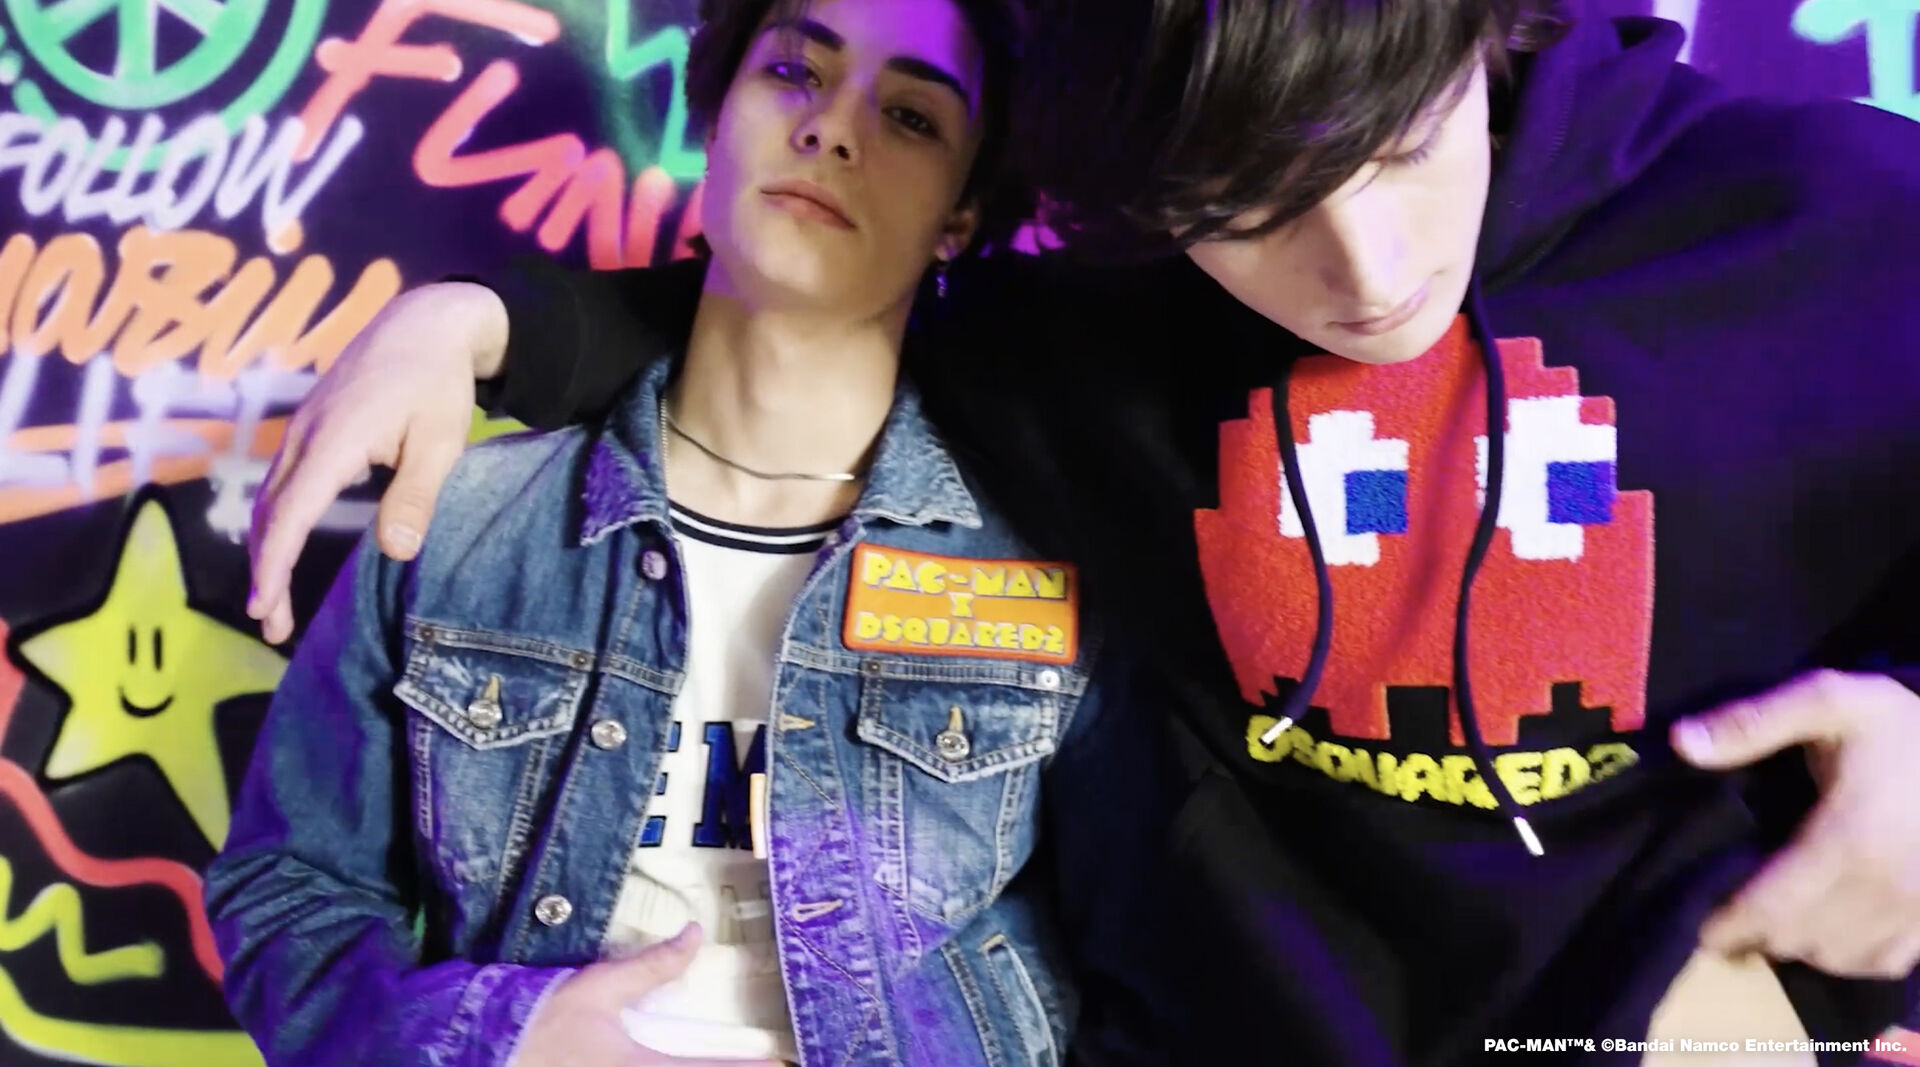 Two teenagers hugging on a graffiti wall background. One wears a leather jacket and the other one wears a black hoodie with pac-man characters on it.